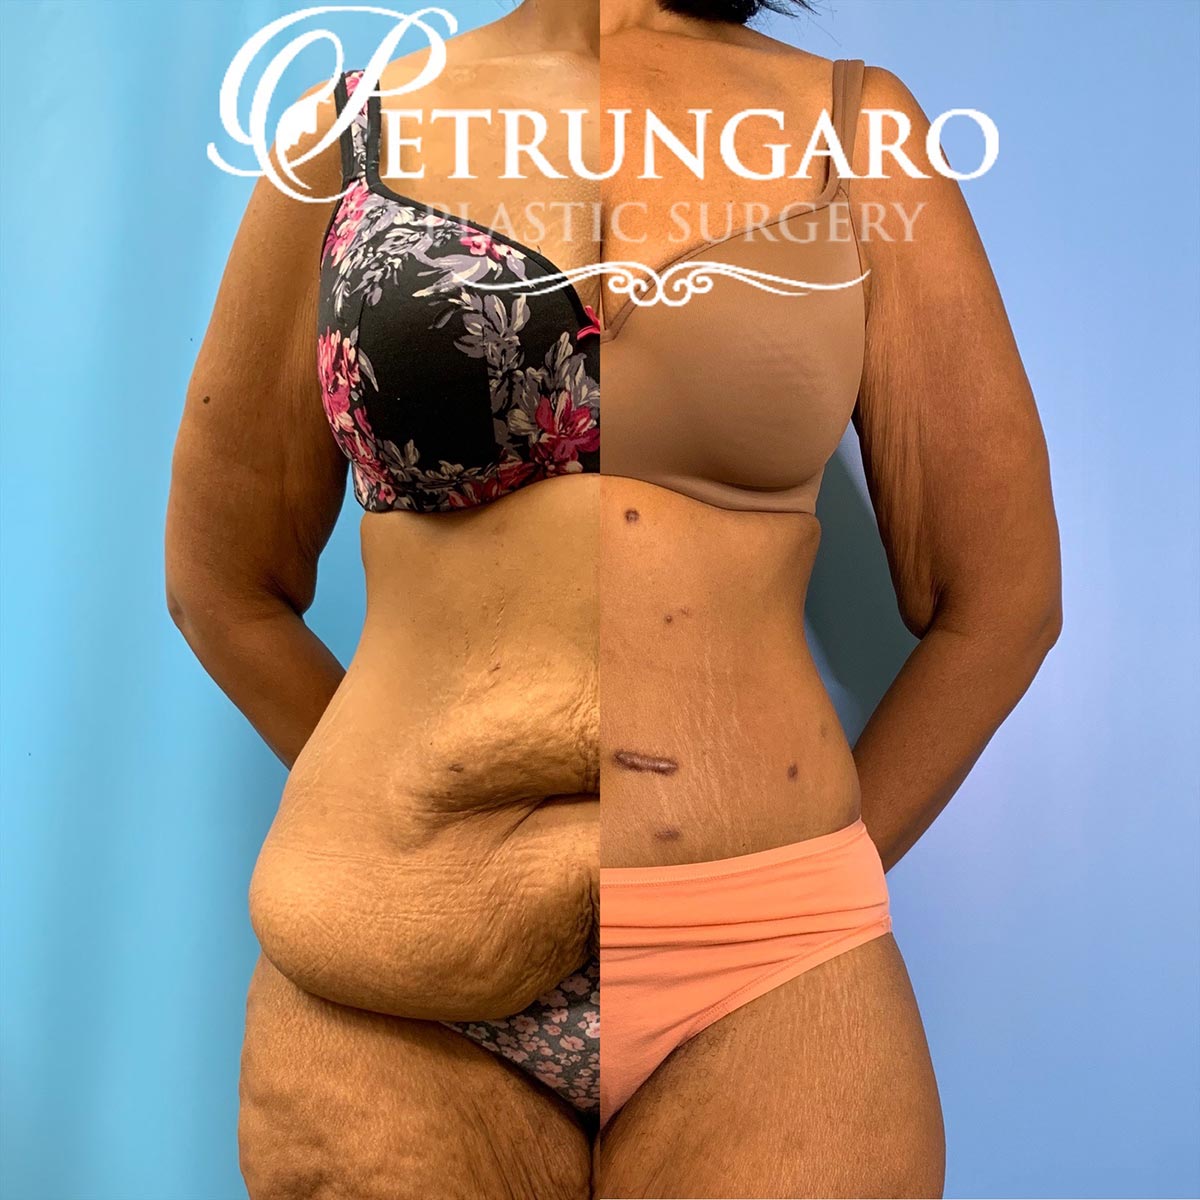 42 year old woman 3 months after a circumferential body lift-8